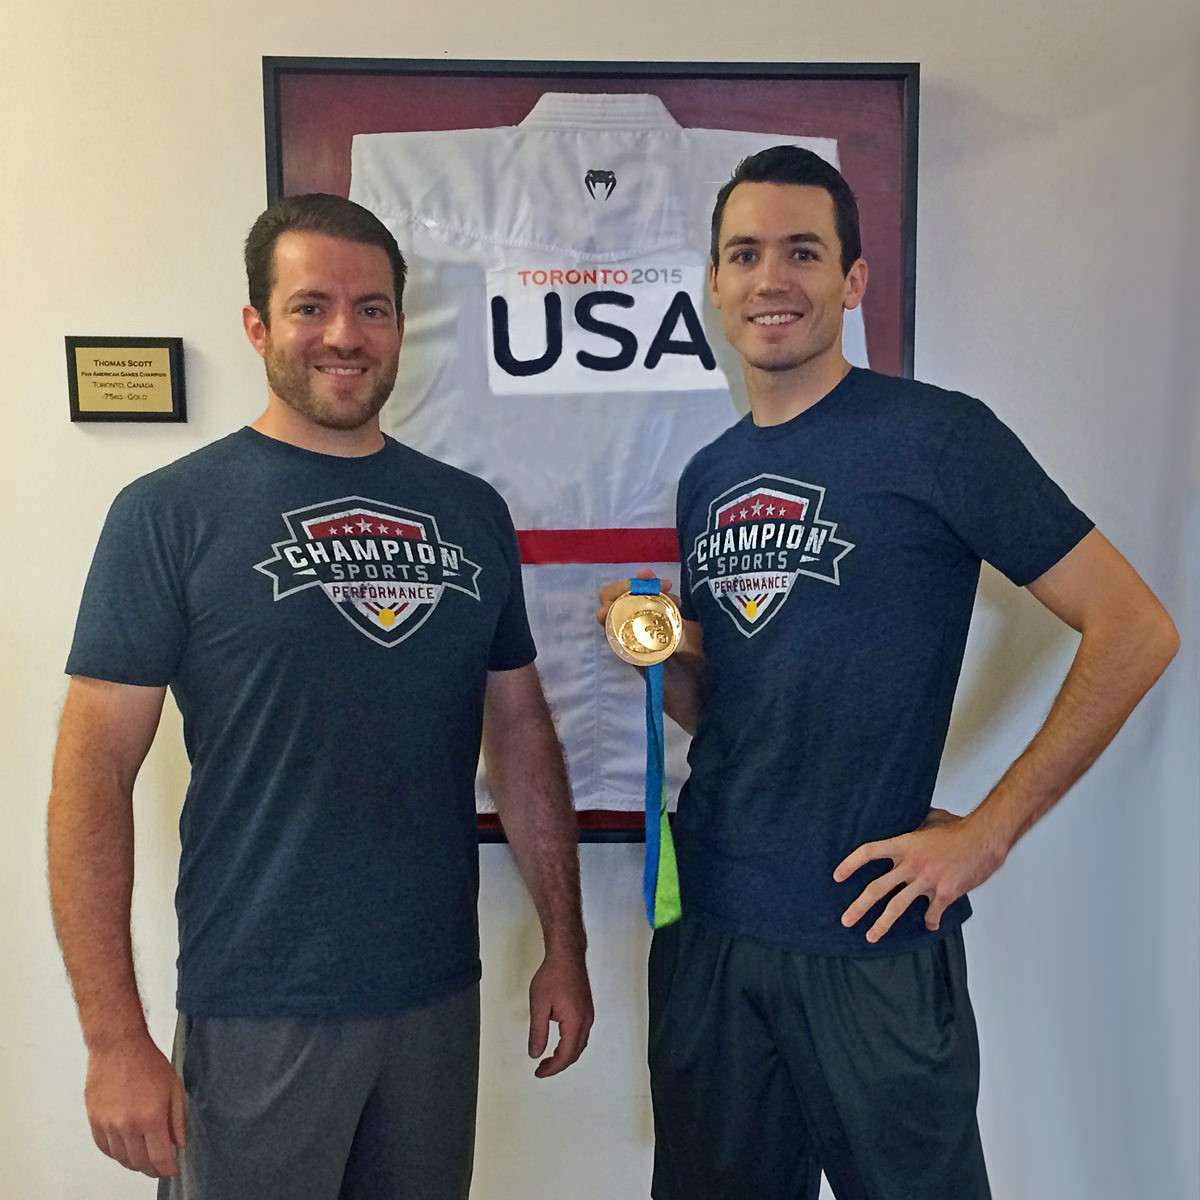 Champion Sports Performance Coach Chris Stratis and Athlete Tom Scott with his Pan American Games gold medal and his framed gi from the competition.